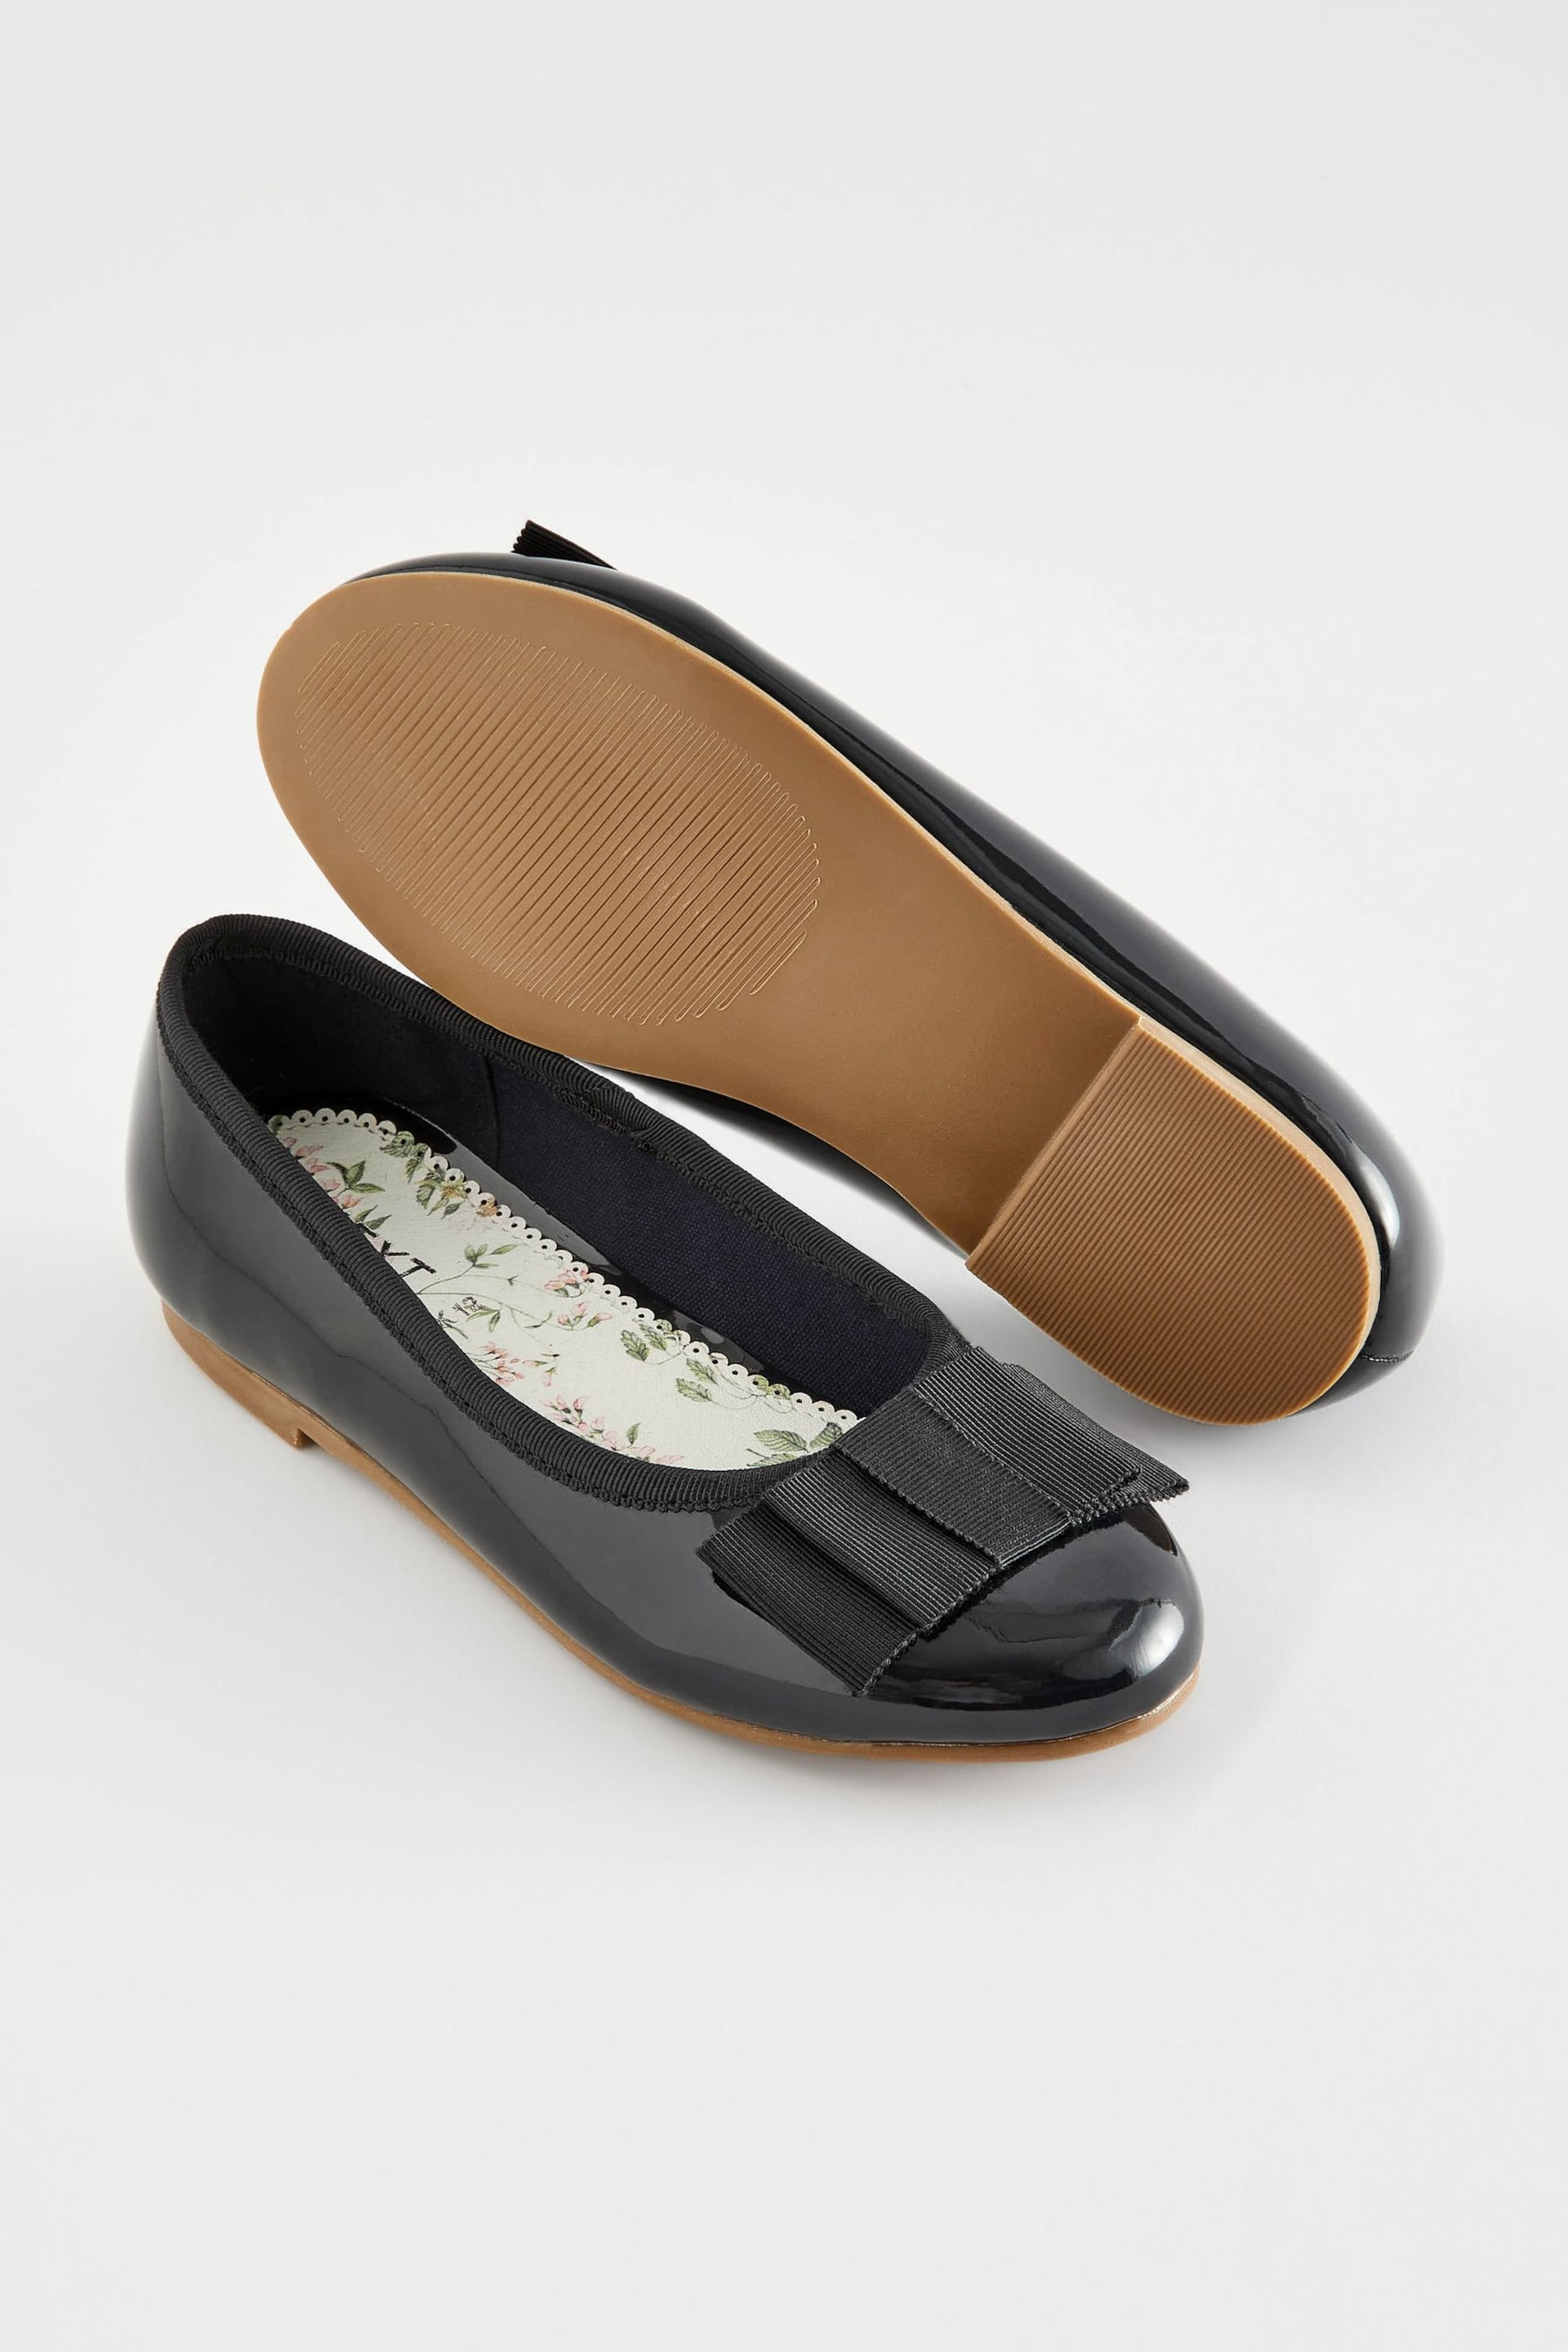 Navy Patent Bow Occasion Ballerinas Shoes - Image 3 of 5